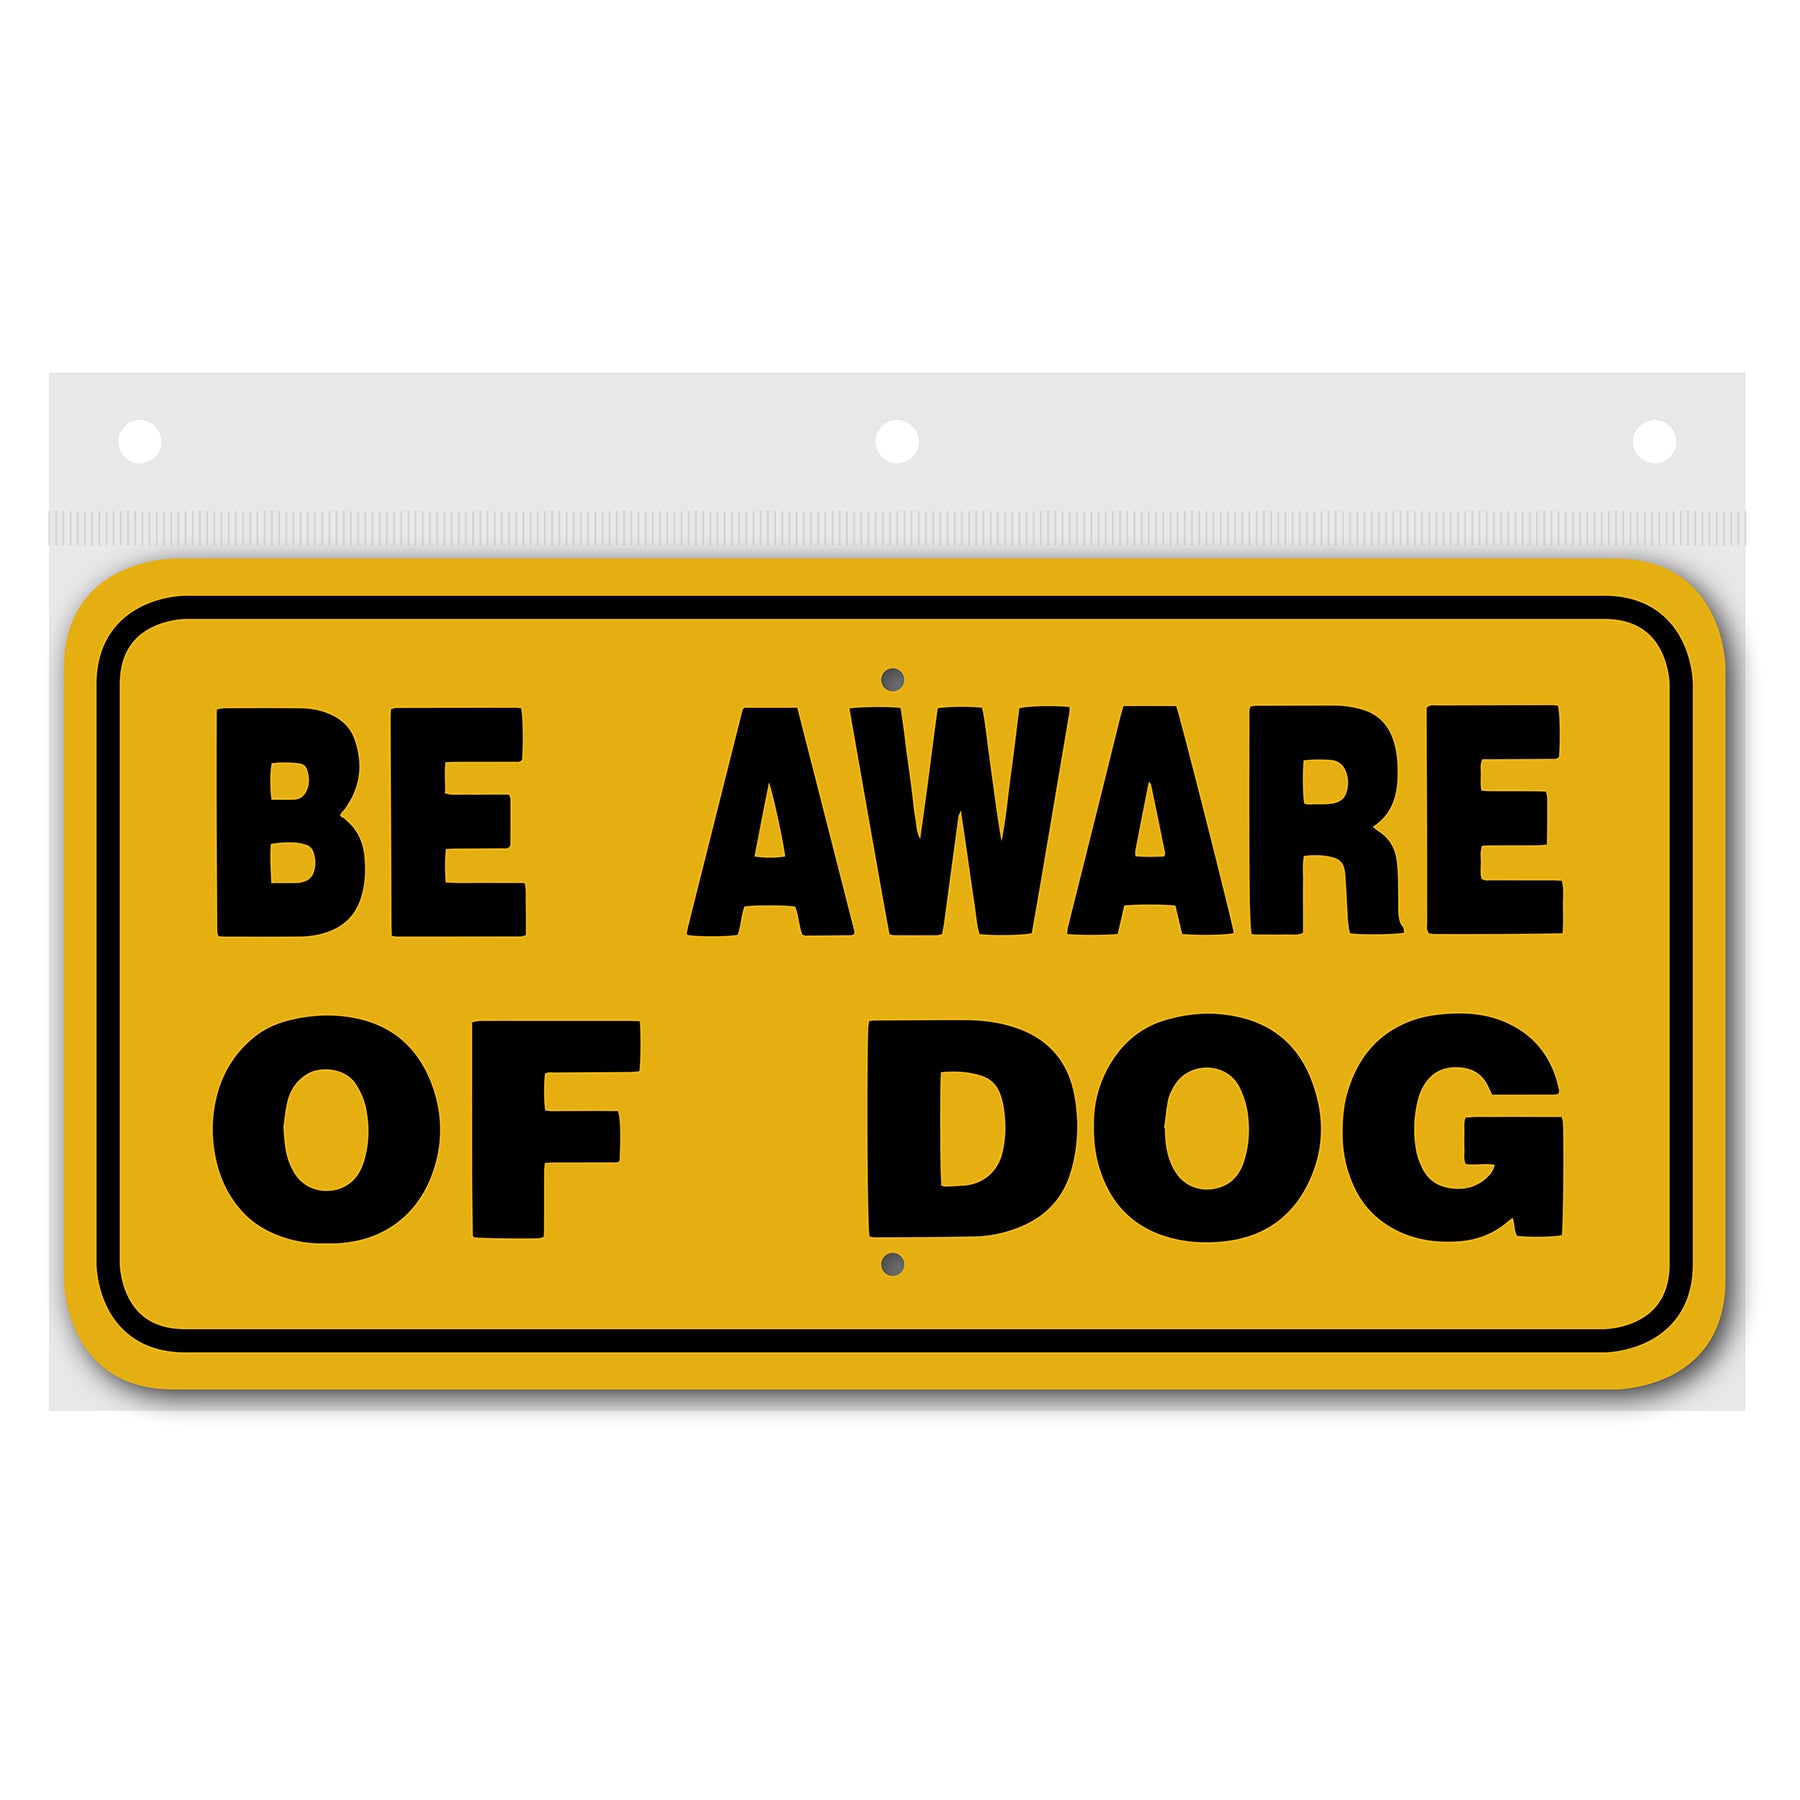 be aware of dog 3444444 front